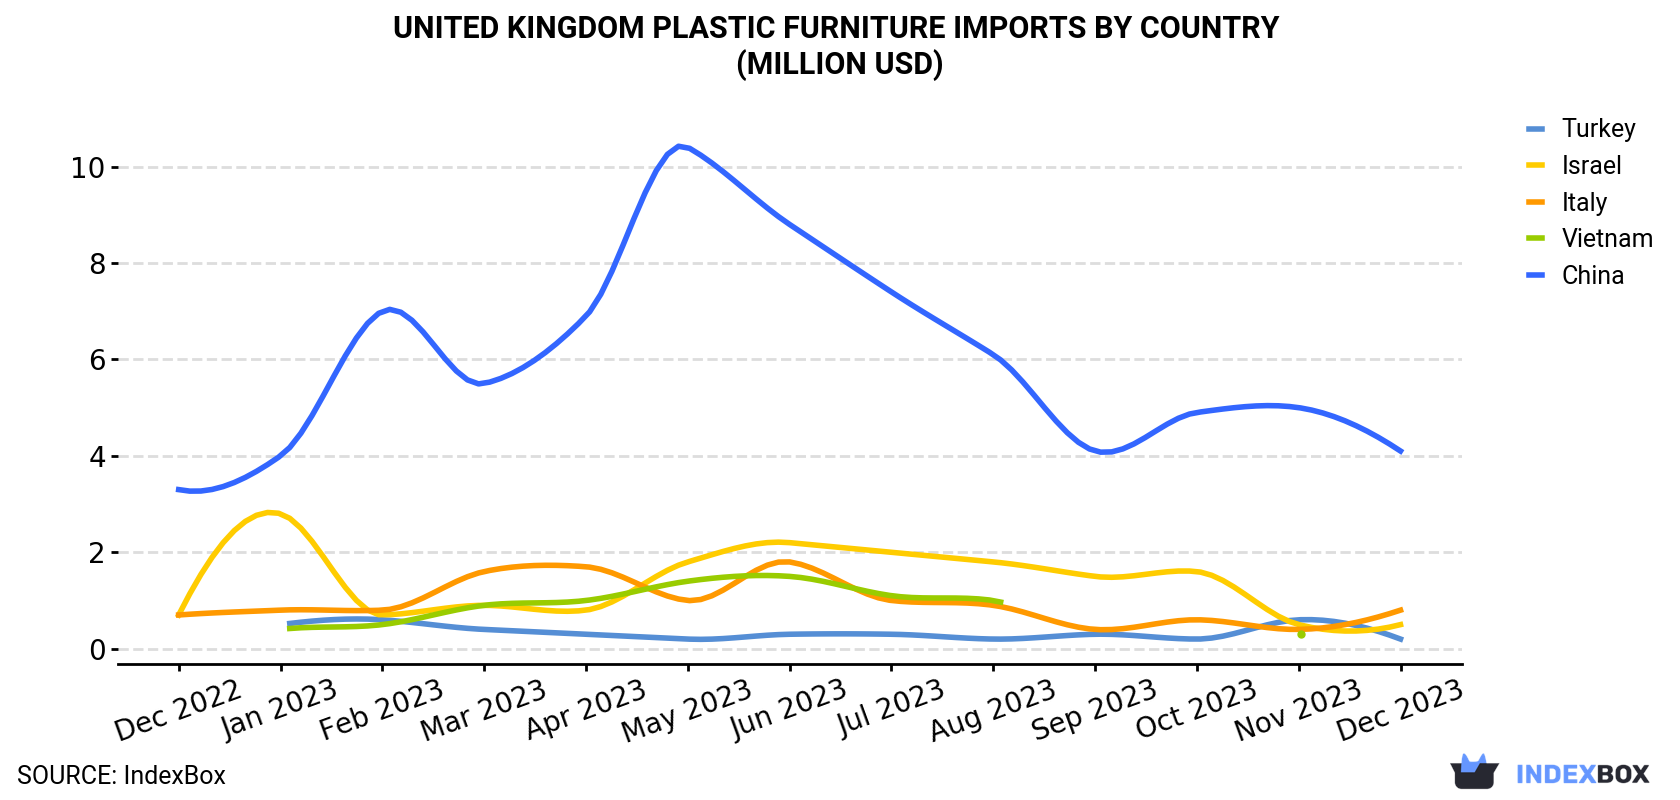 United Kingdom Plastic Furniture Imports By Country (Million USD)